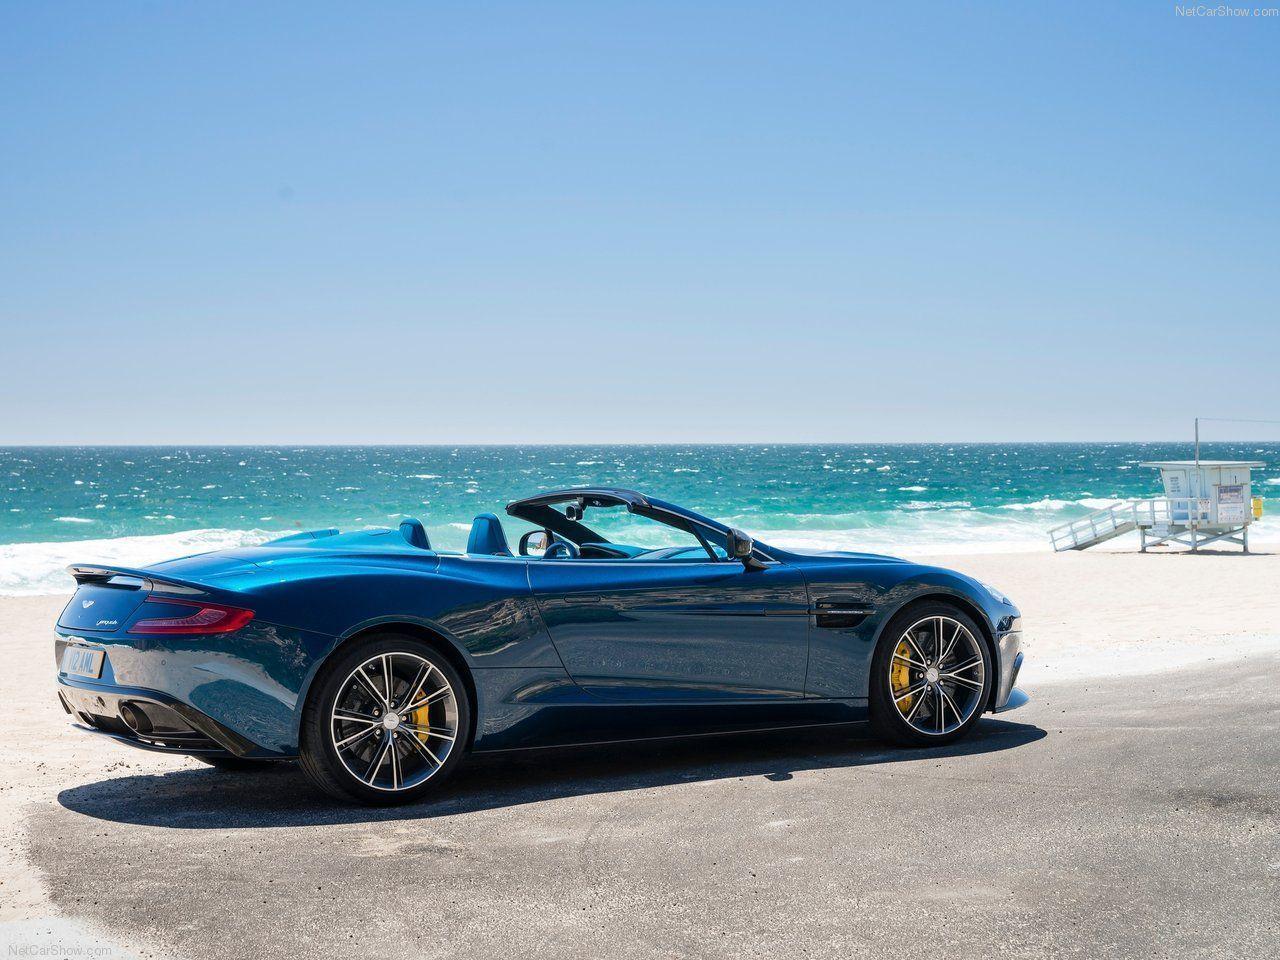 Aston Martin Vanquish 2016 Ultra Hd Wallpapers For Pc